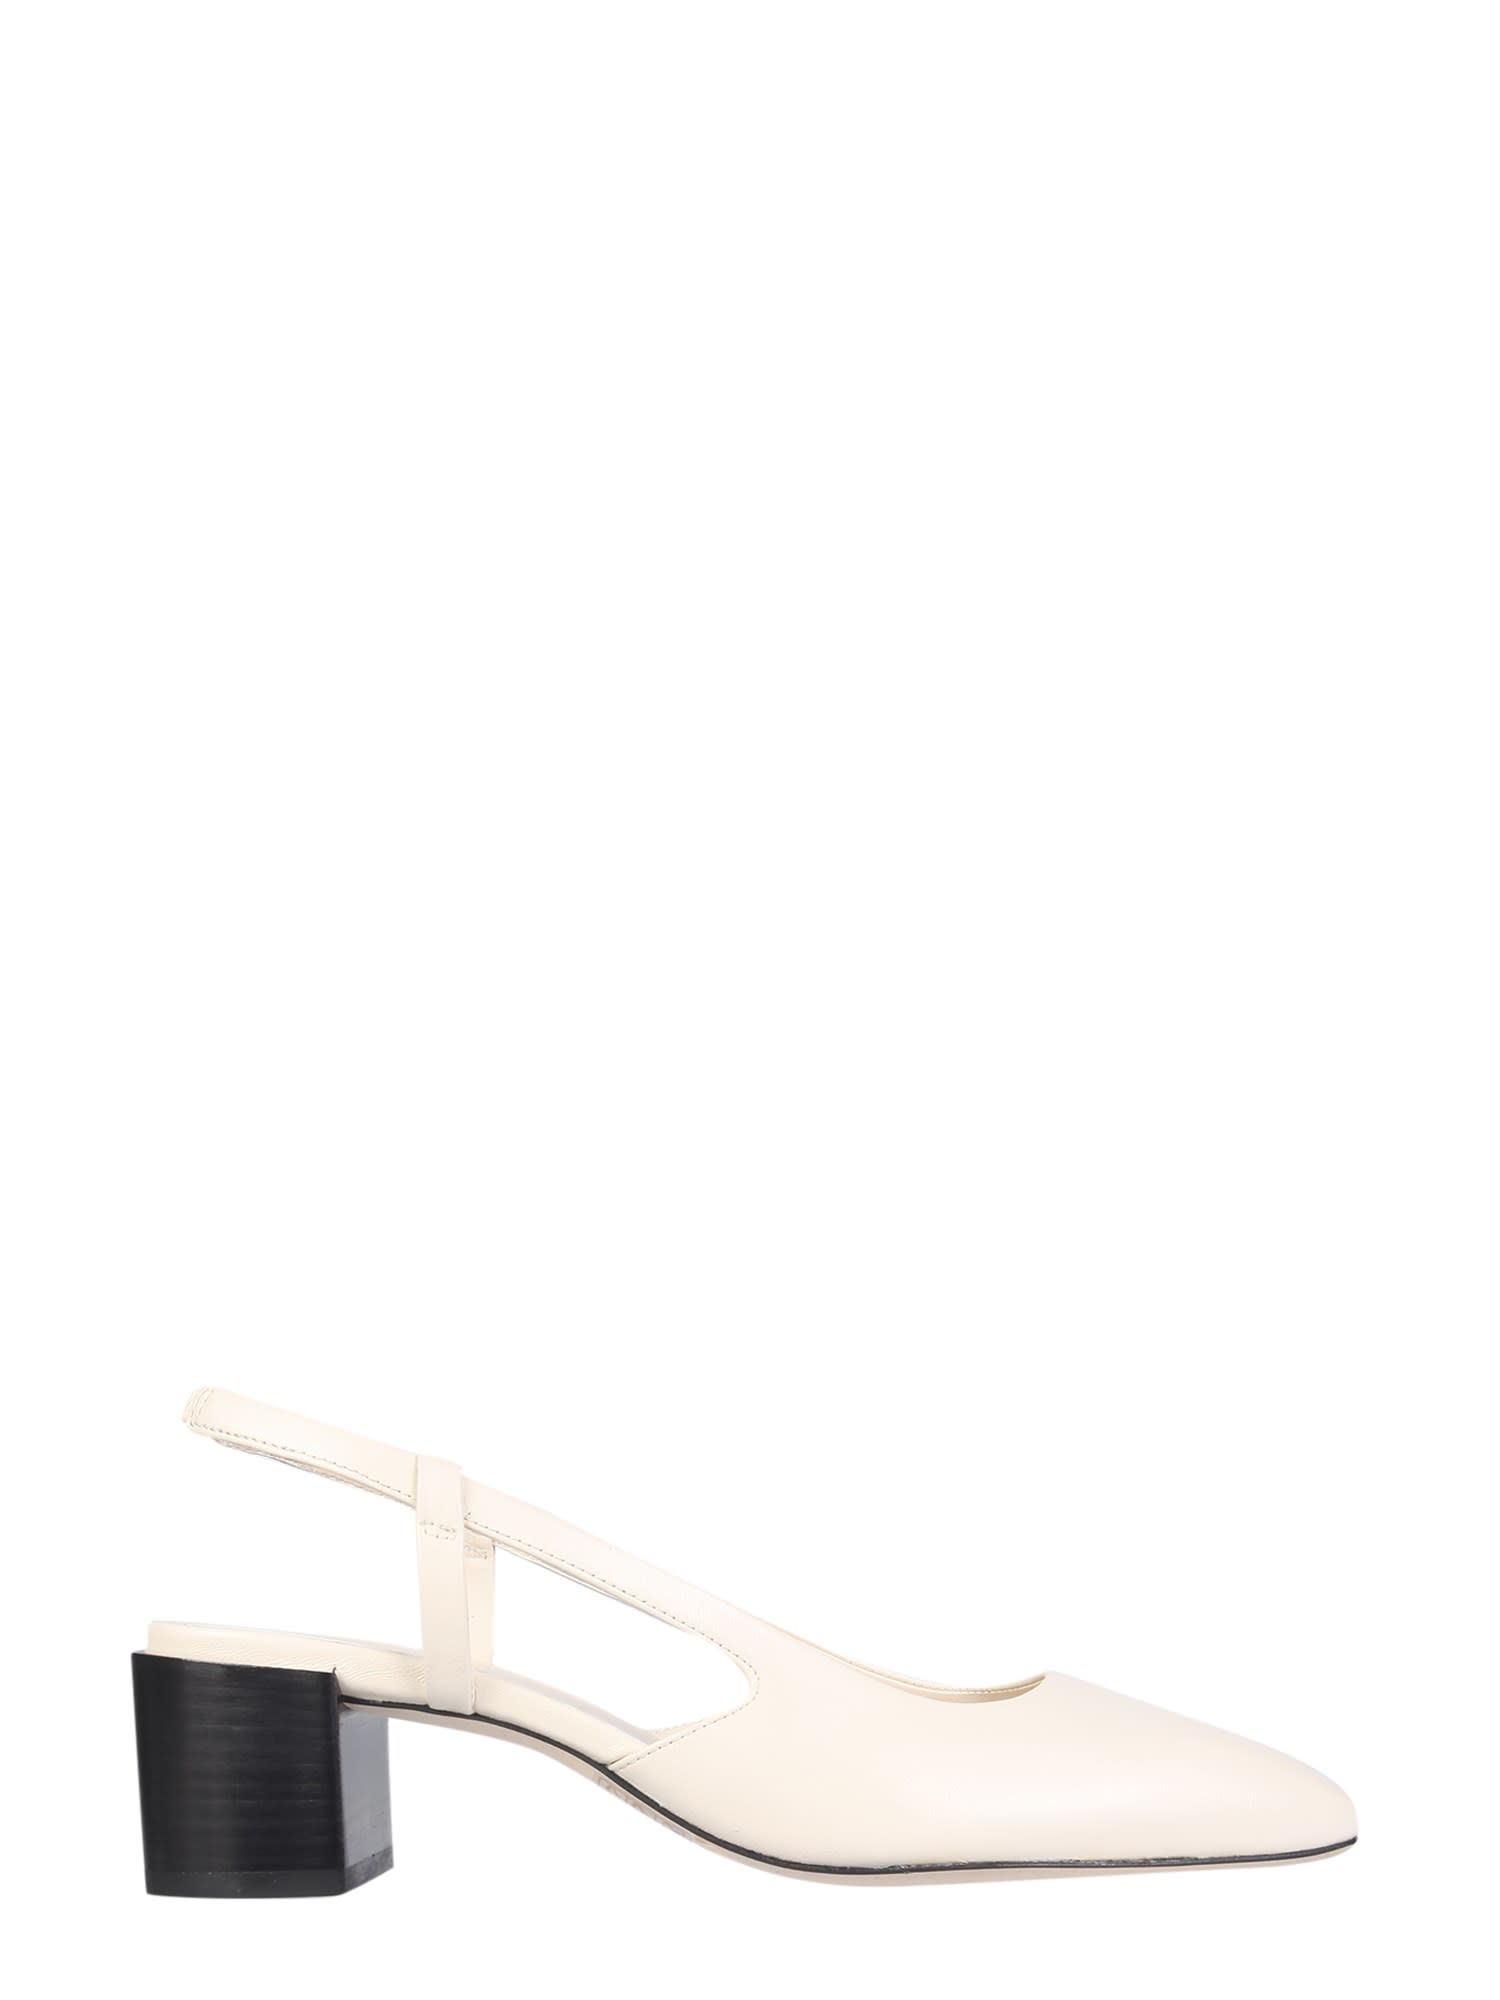 Aeyde Alicia Slingback Pumps In White | ModeSens